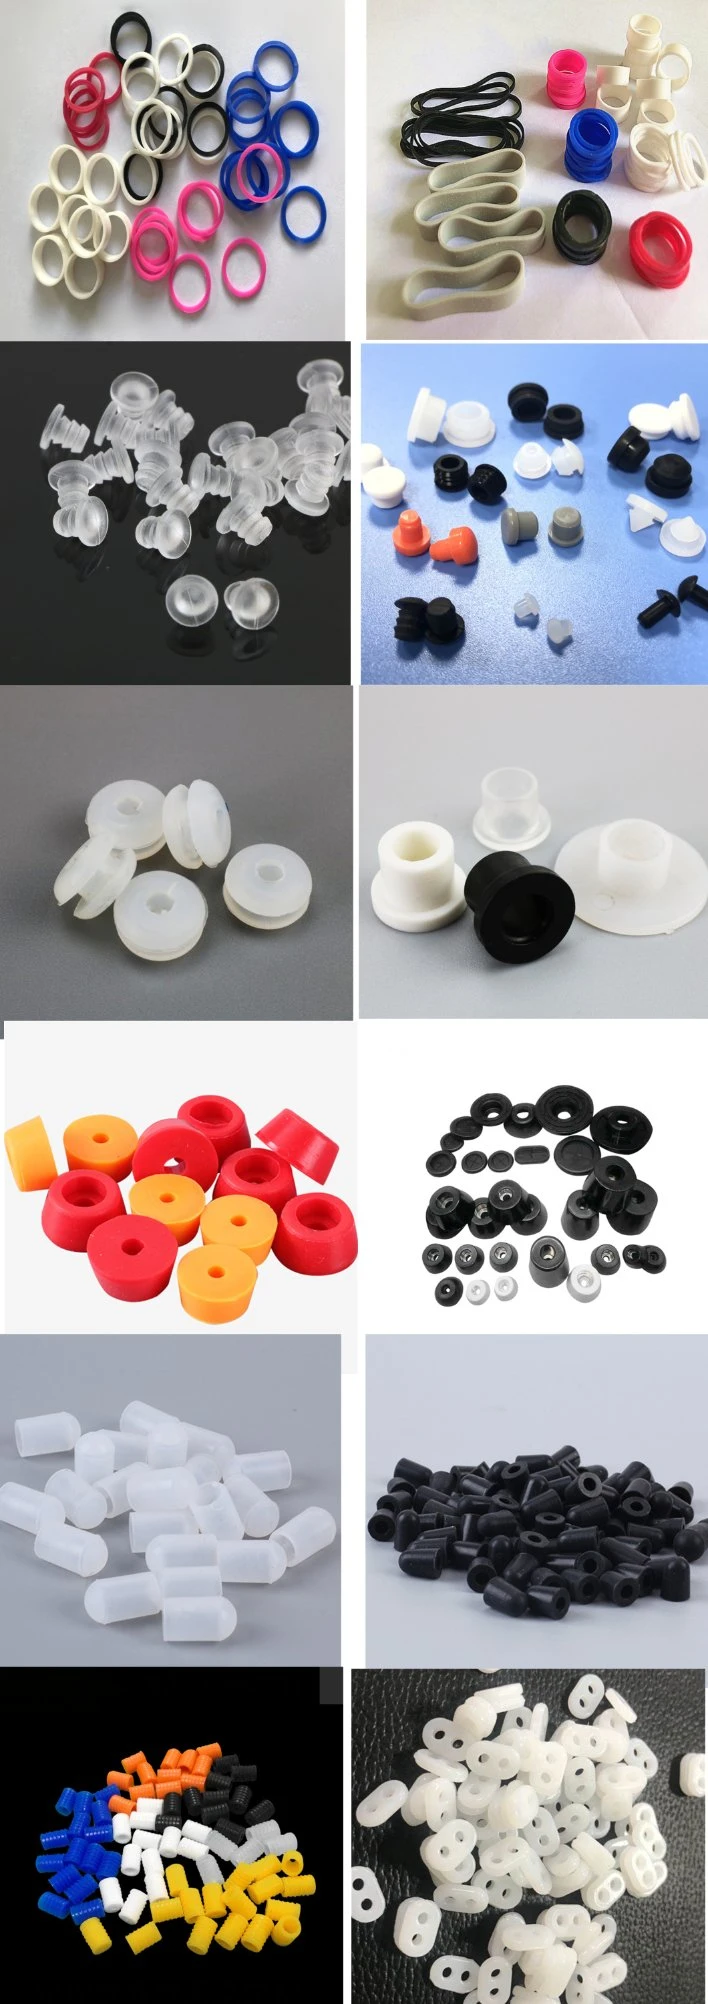 T Shape Silicone Rubber Hollow Small Bushing Plug Part Grommet Single Open Hole